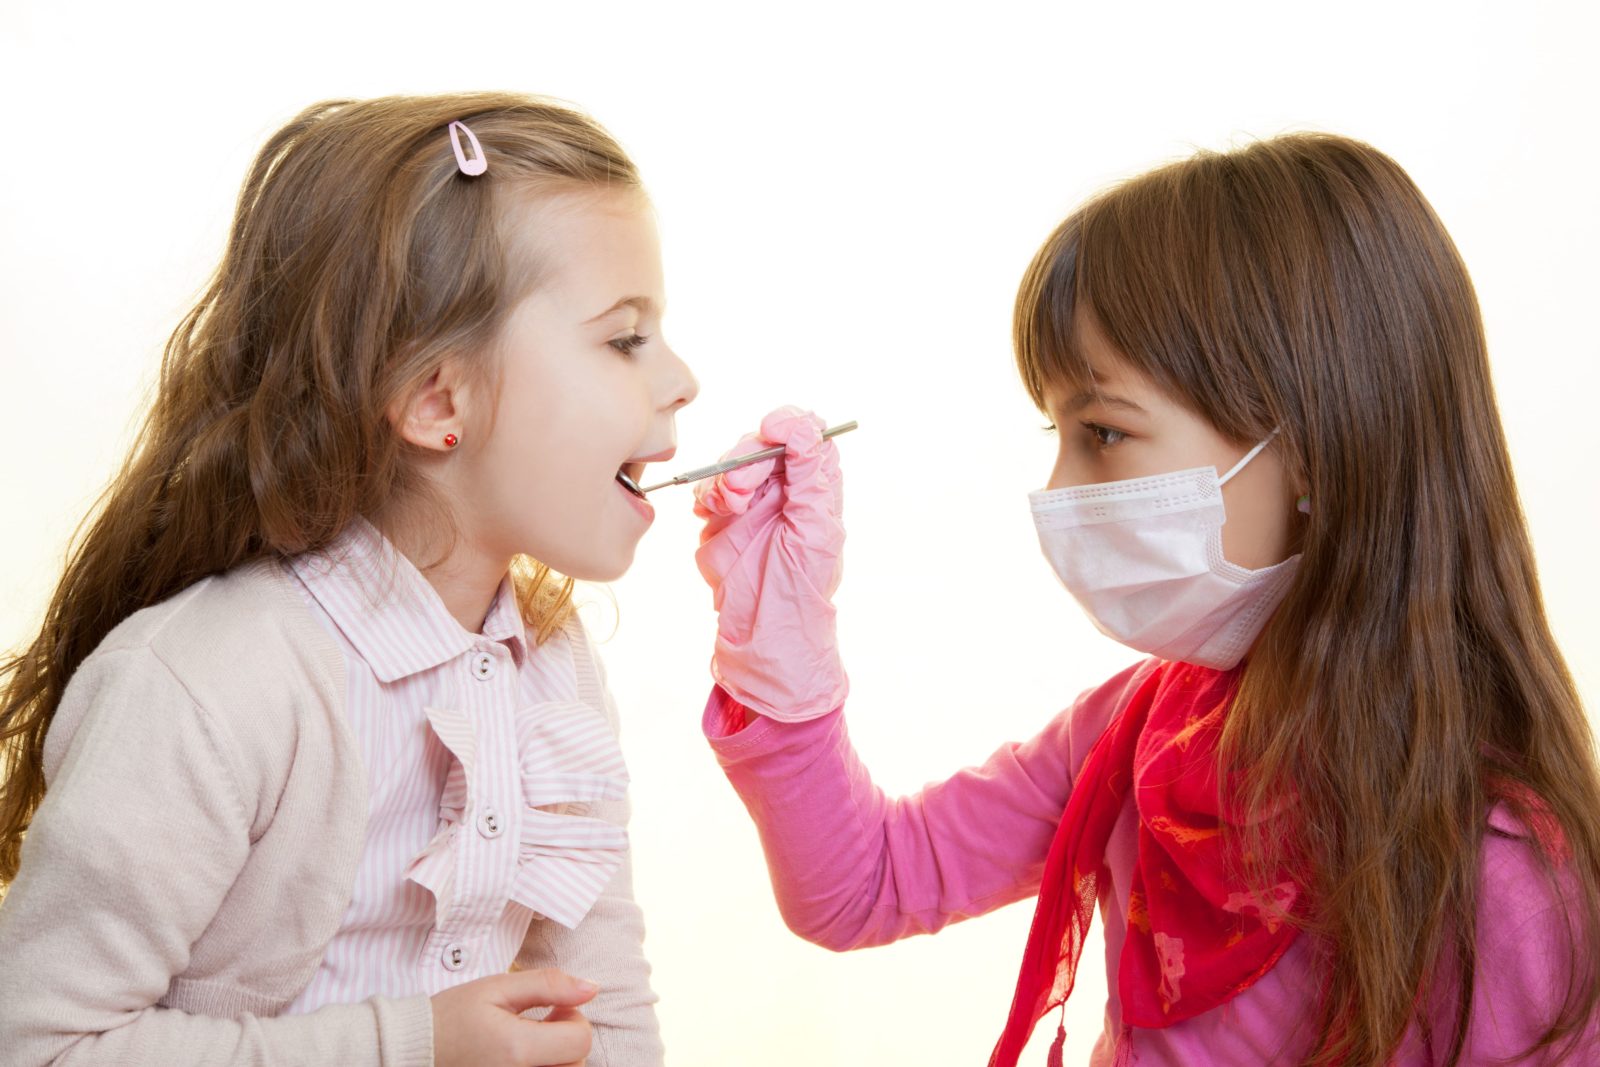 two young girls playing dentist